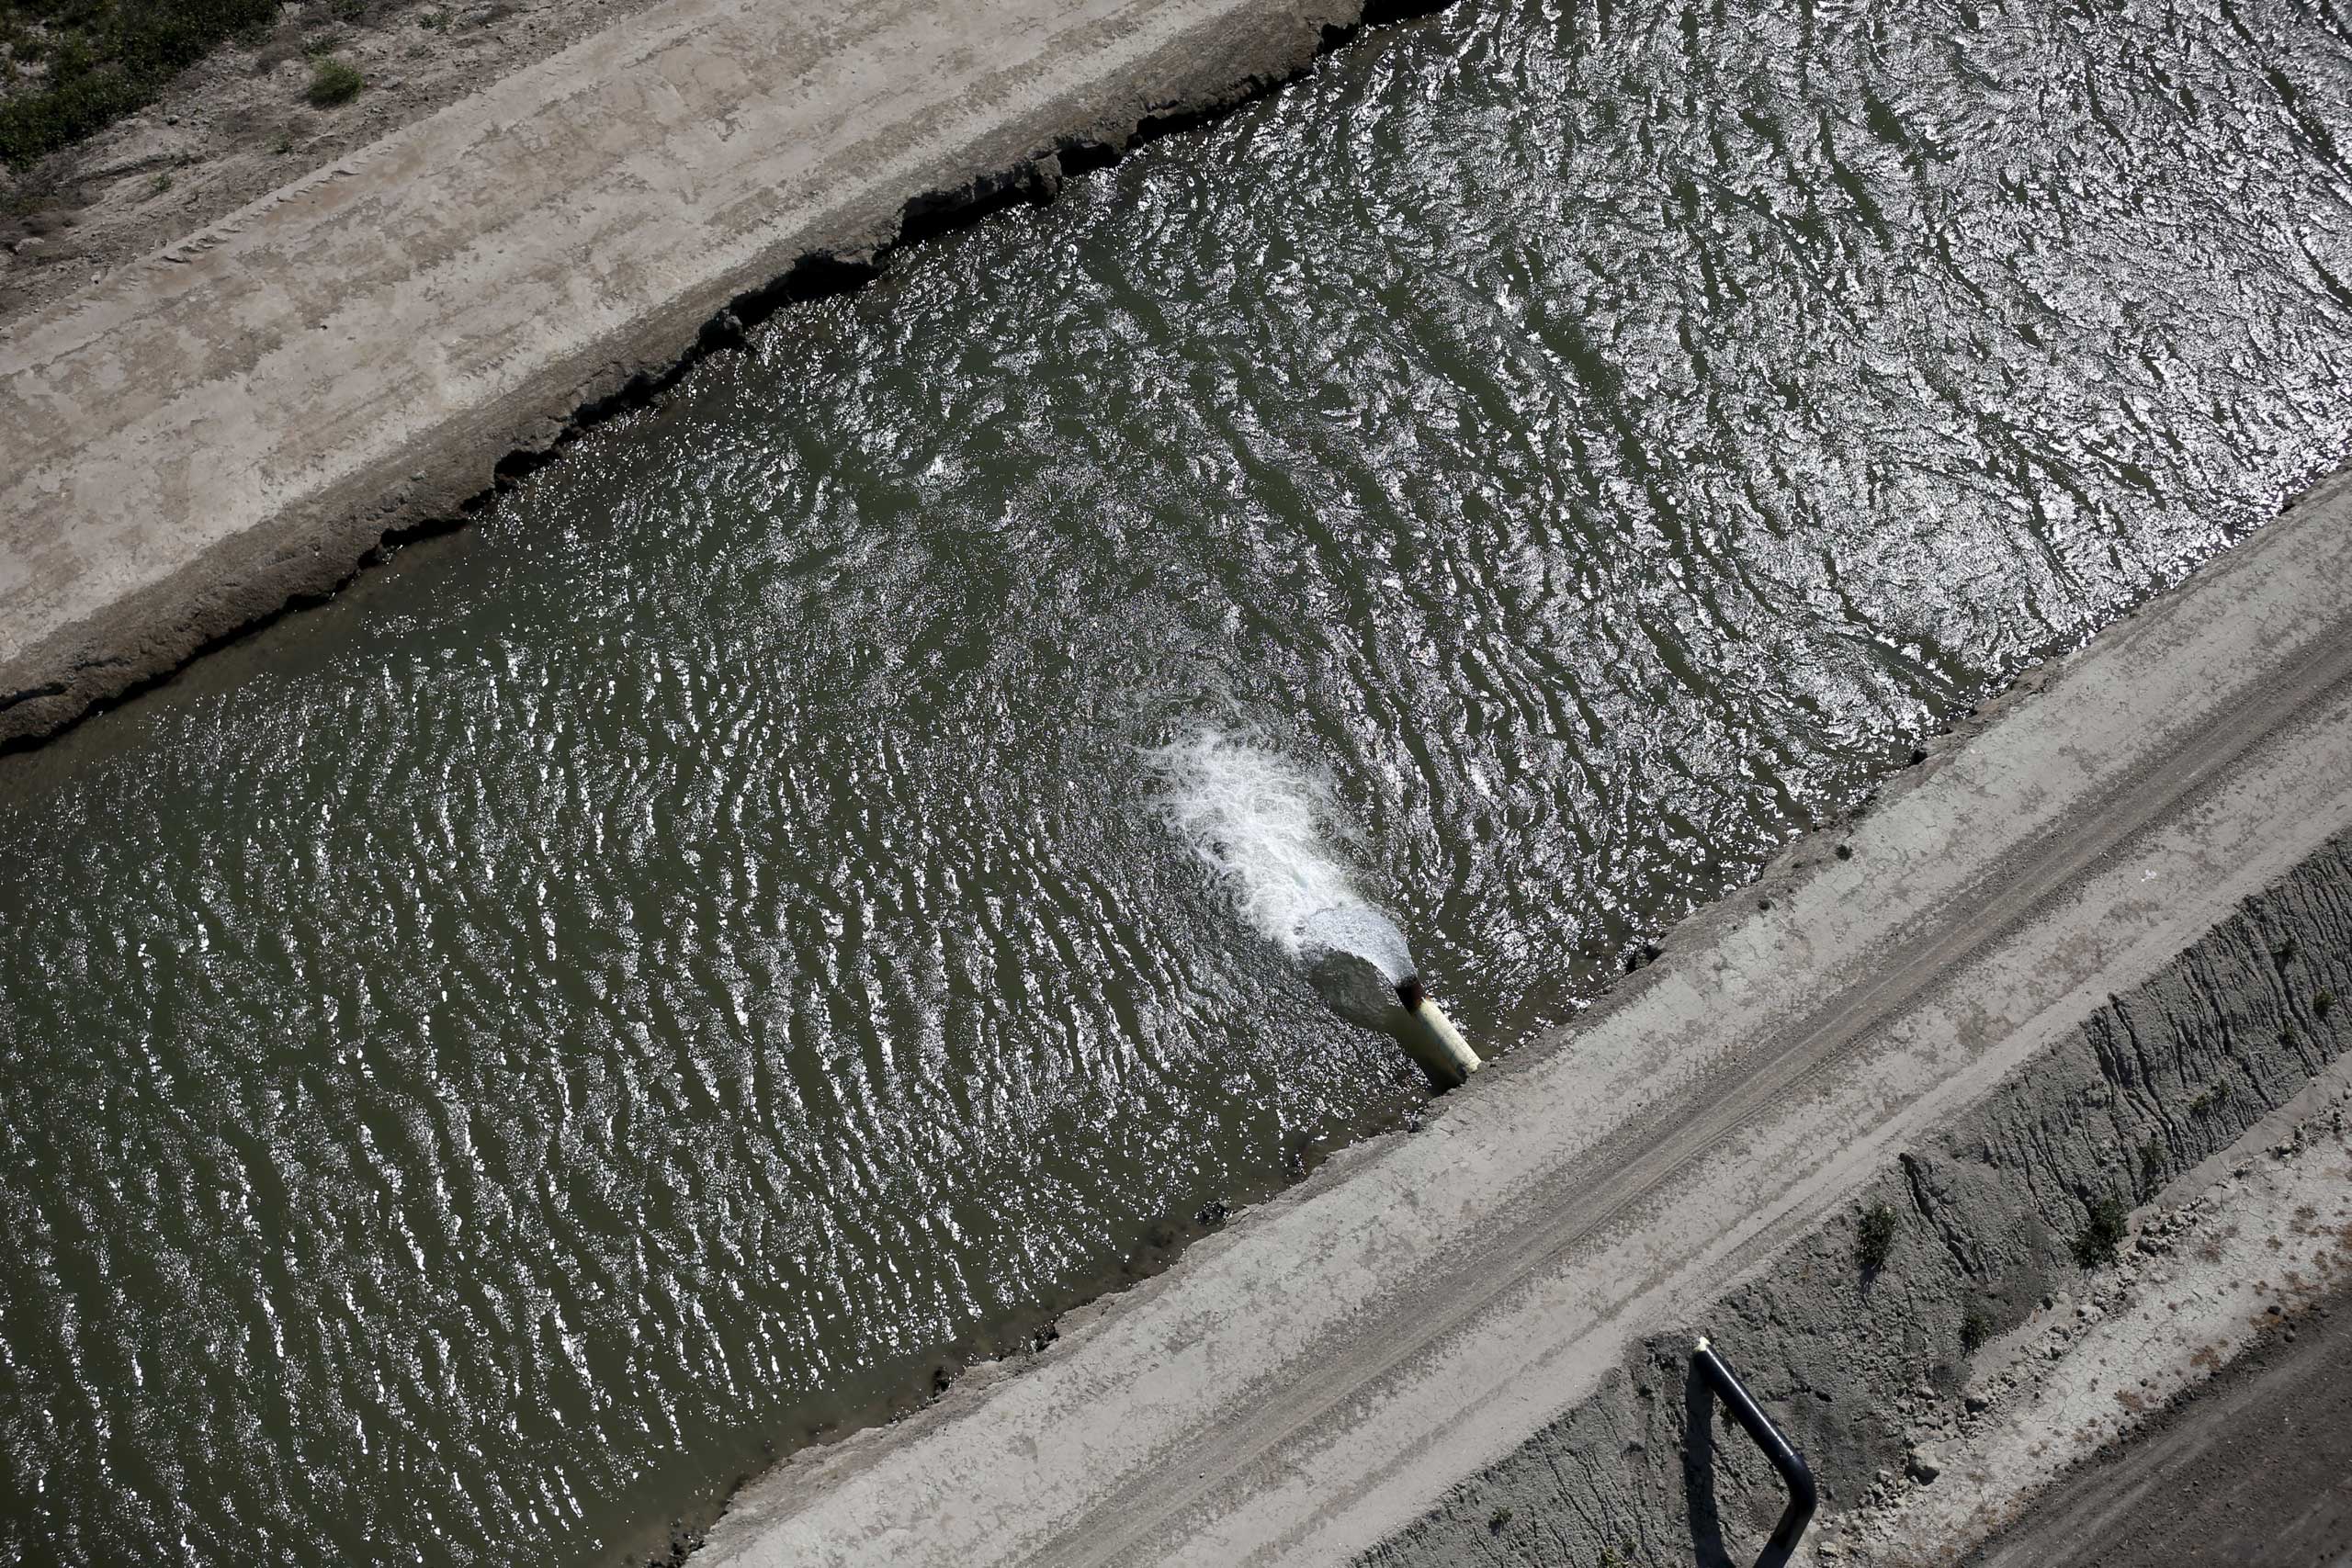 Central Valley farmers have witnessed land sinking by as much as 3 feet, San Francisco Gate reports, as water agencies tap underground reservoirs at unprecedented depths. Water pours into a canal in Los Banos, Calif., May 5, 2015.